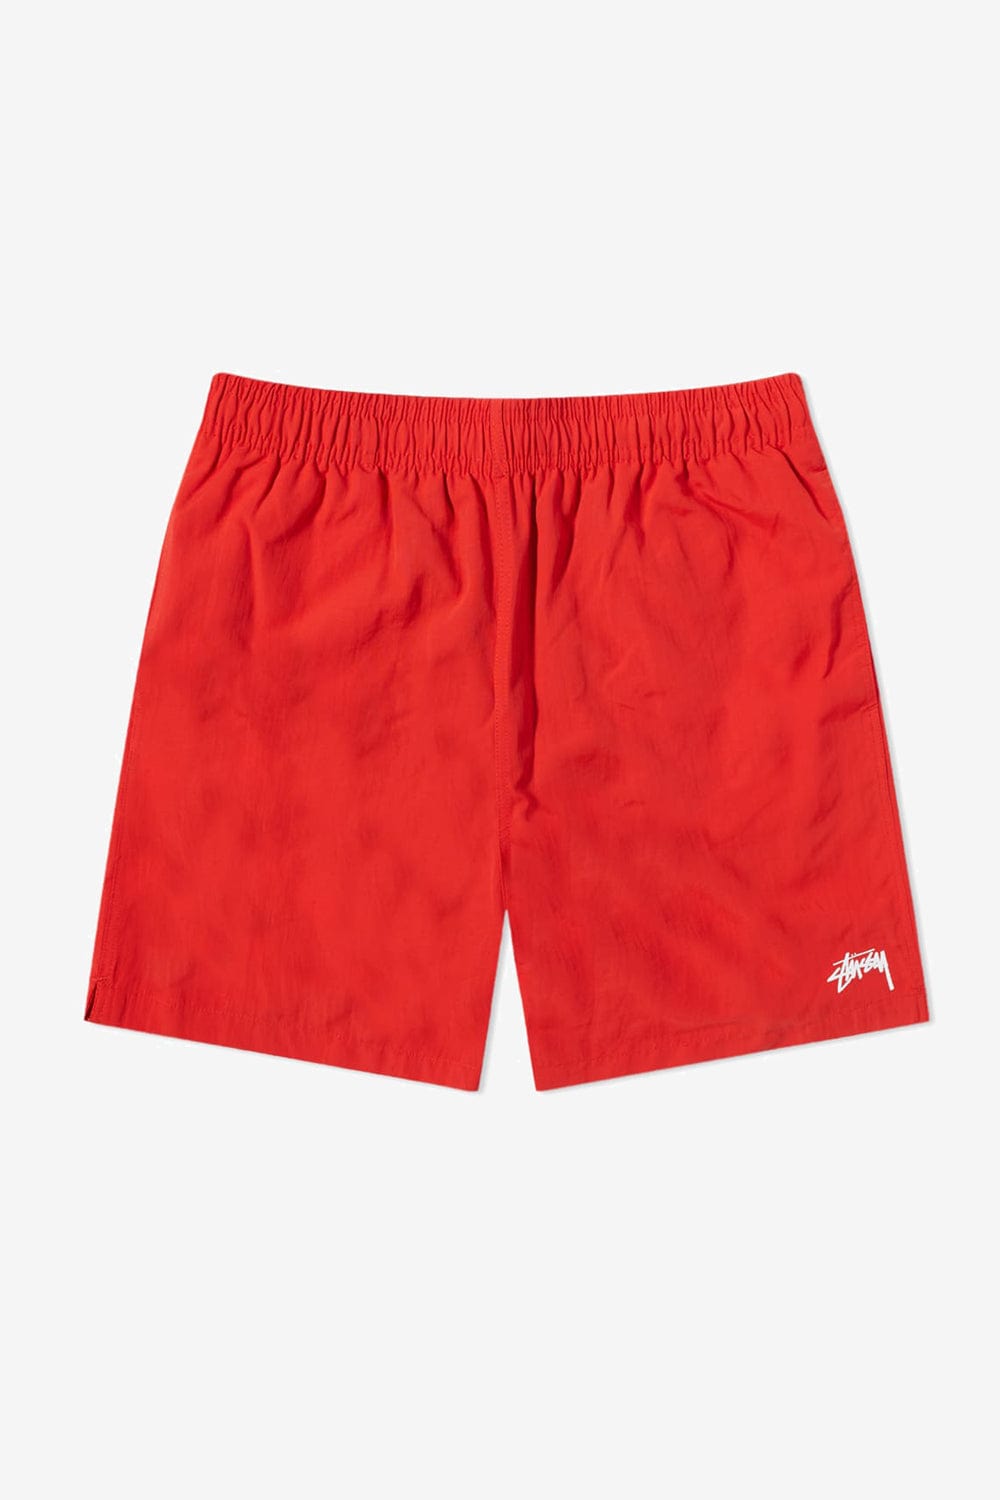 Stussy Stock Water Short (Bright Red) - Commonwealth